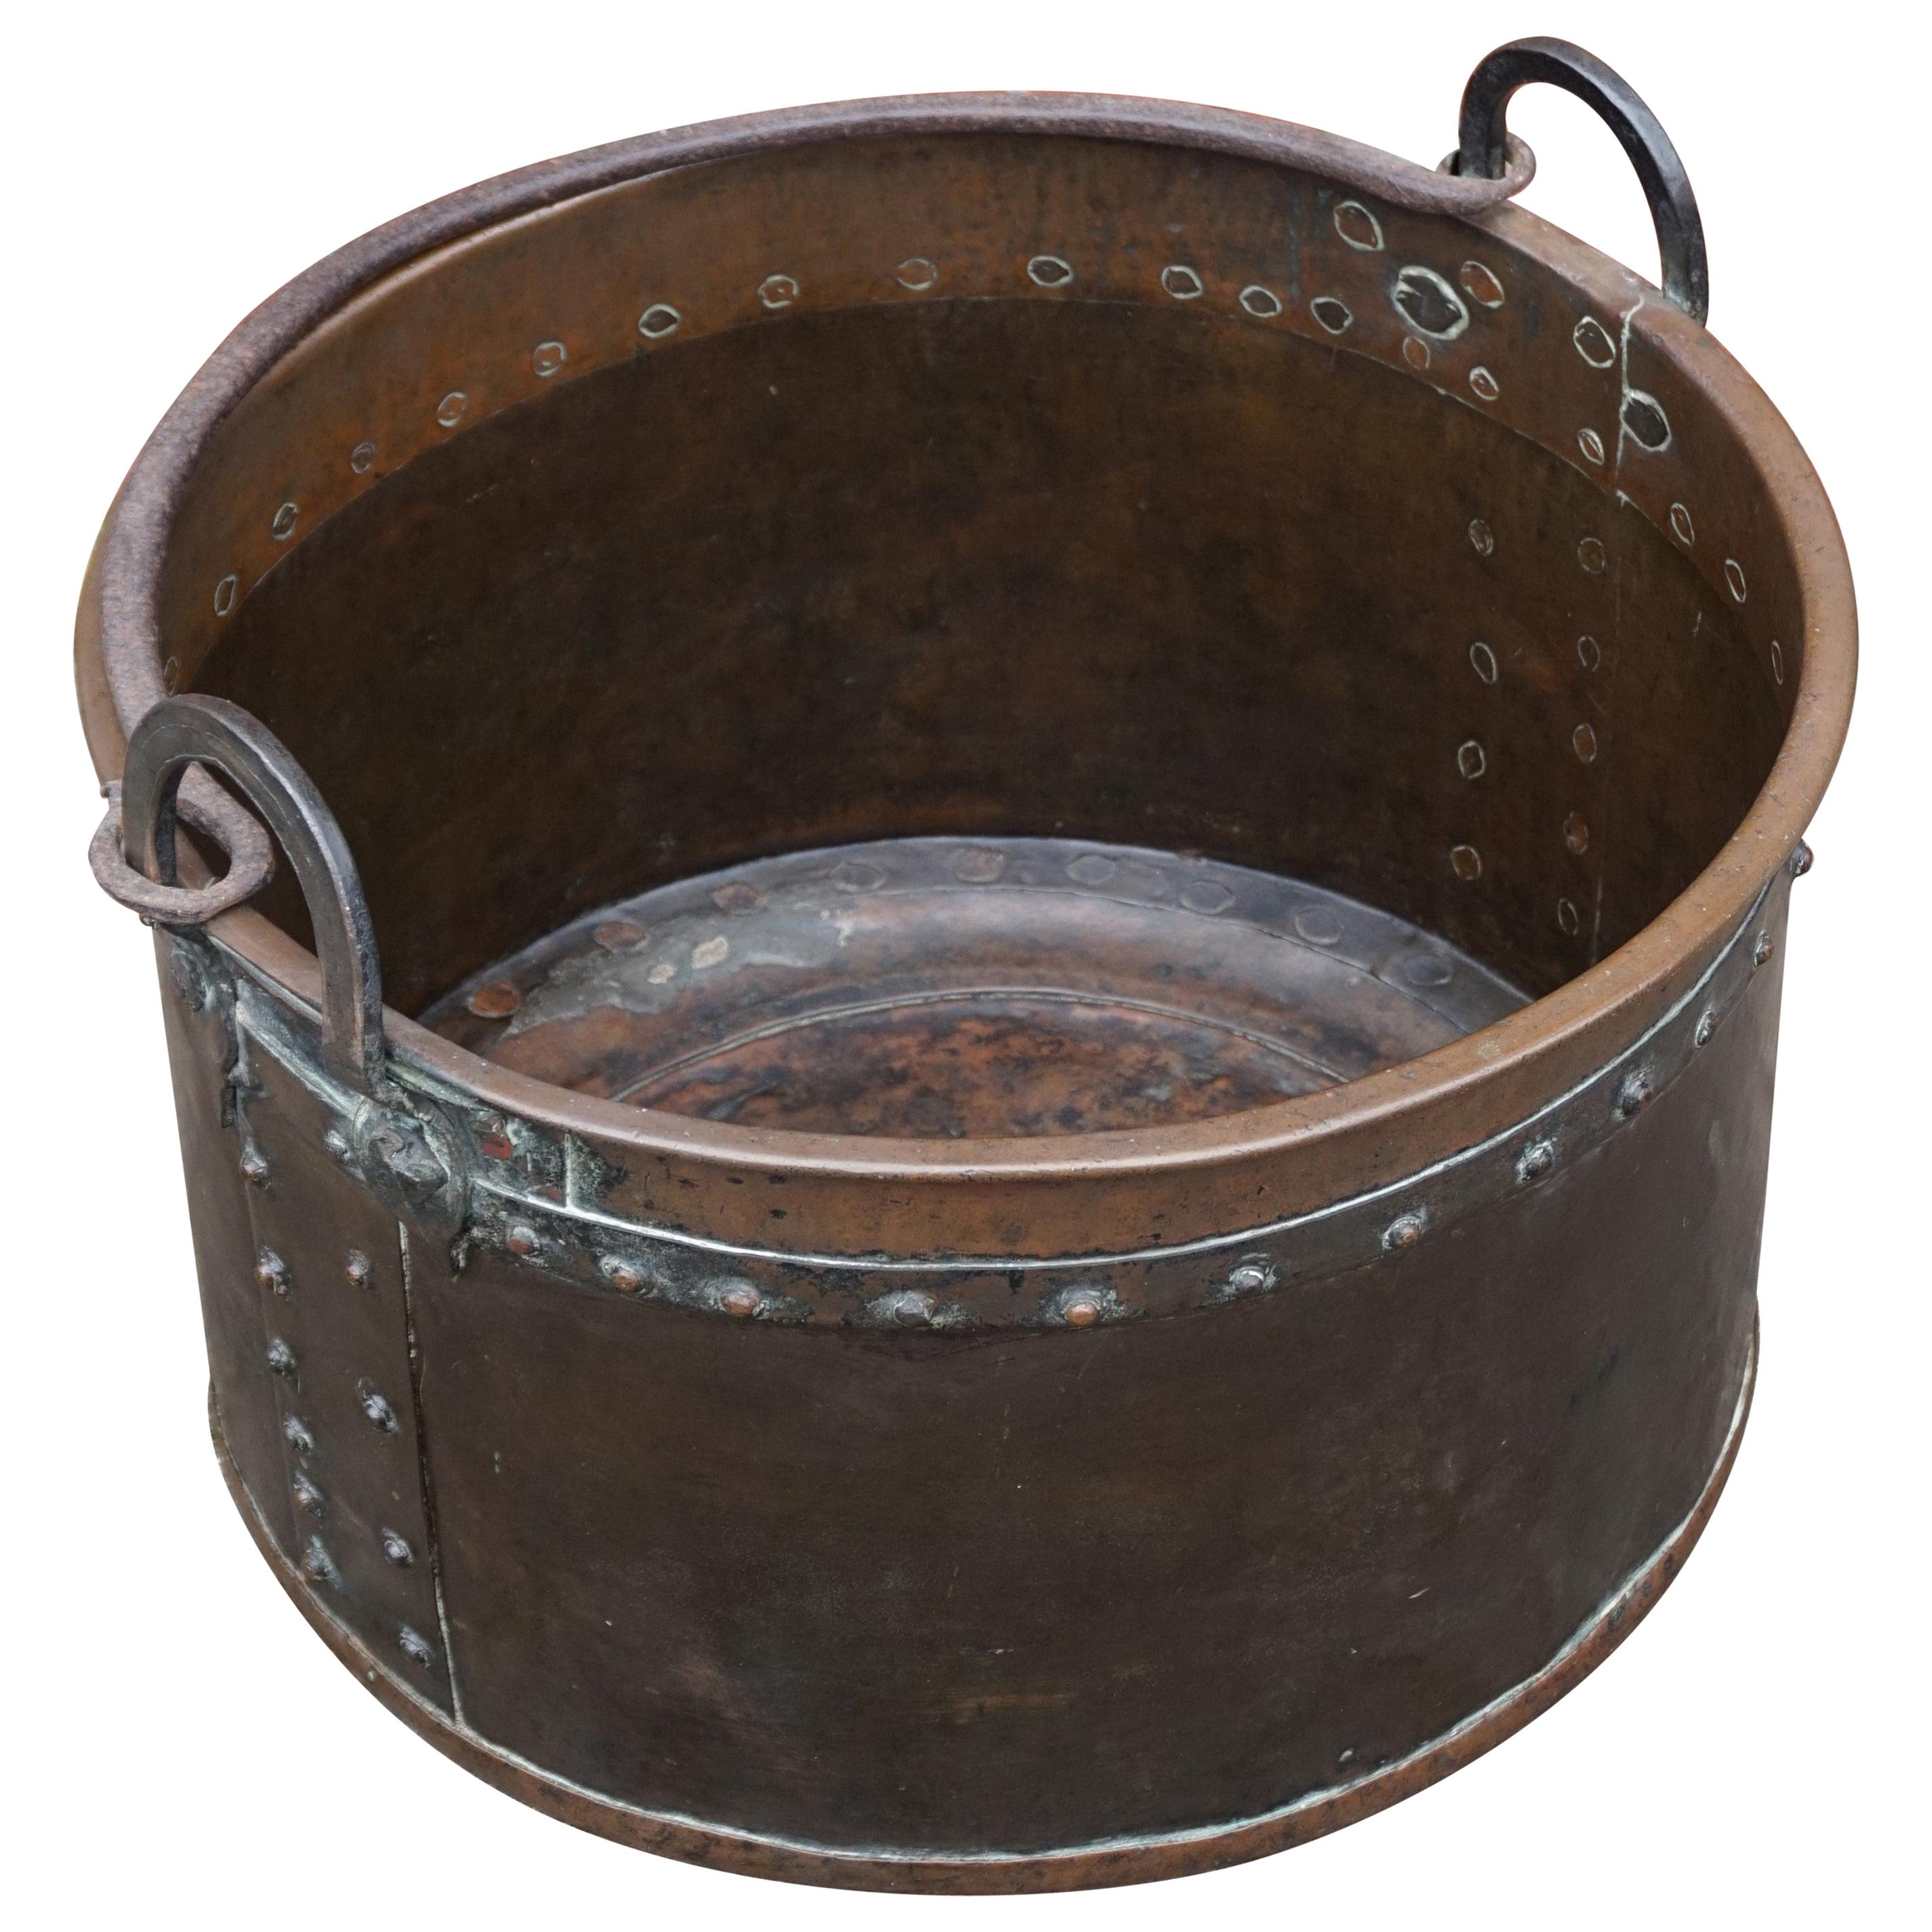 Antique, Large & Decorative Hand Hammered Copper and Forged Iron Firewood Bucket